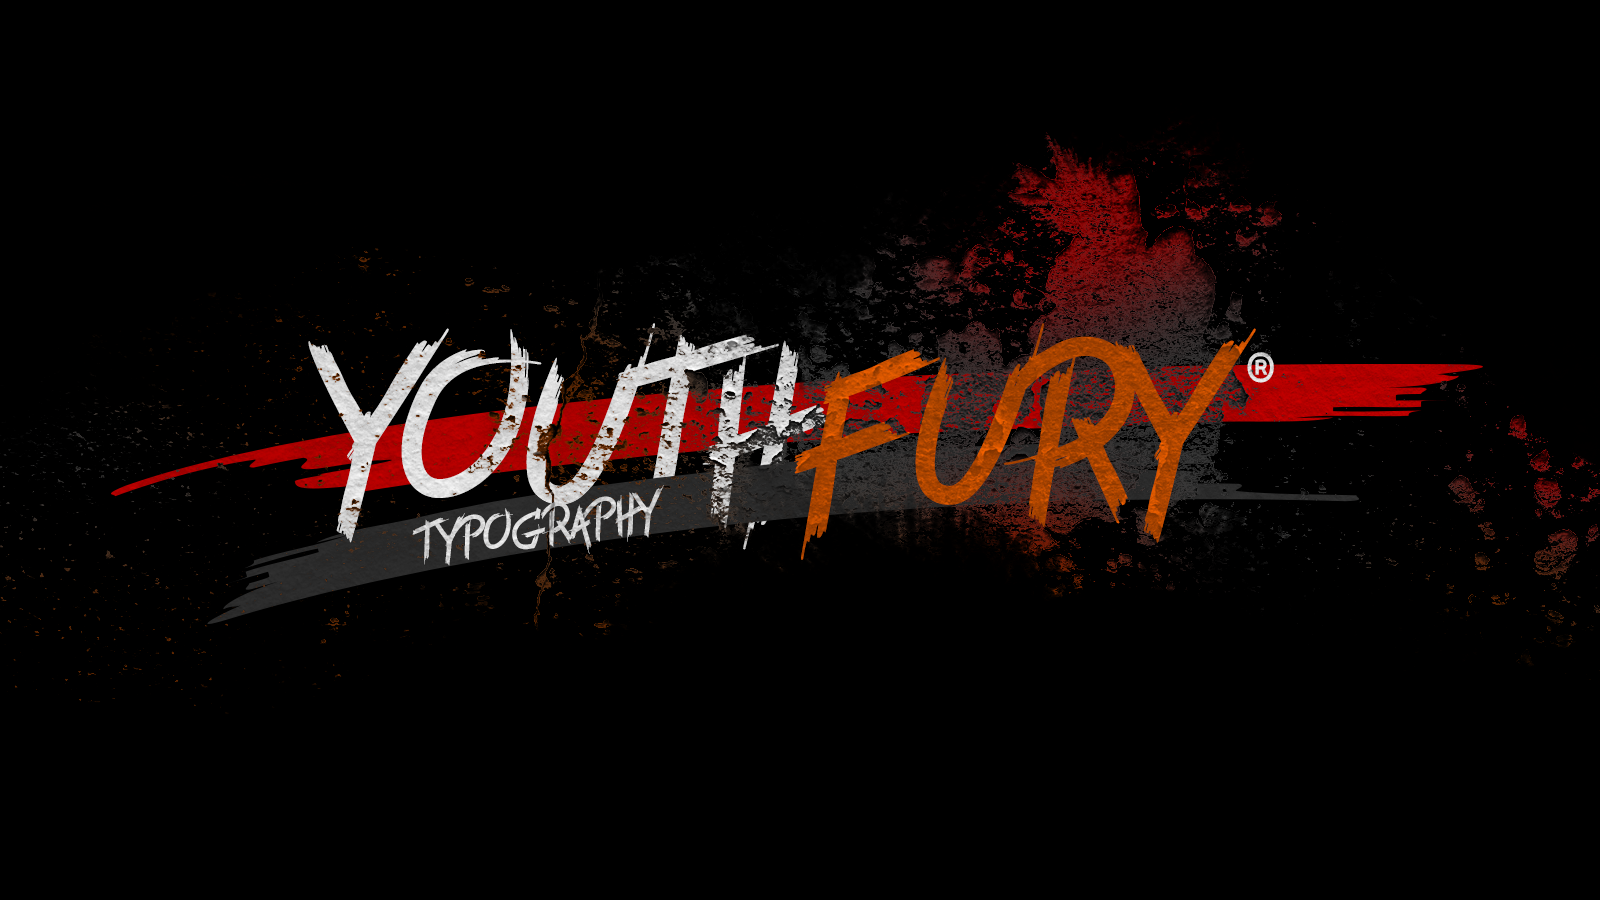 Youth Fury PERSONAL USE